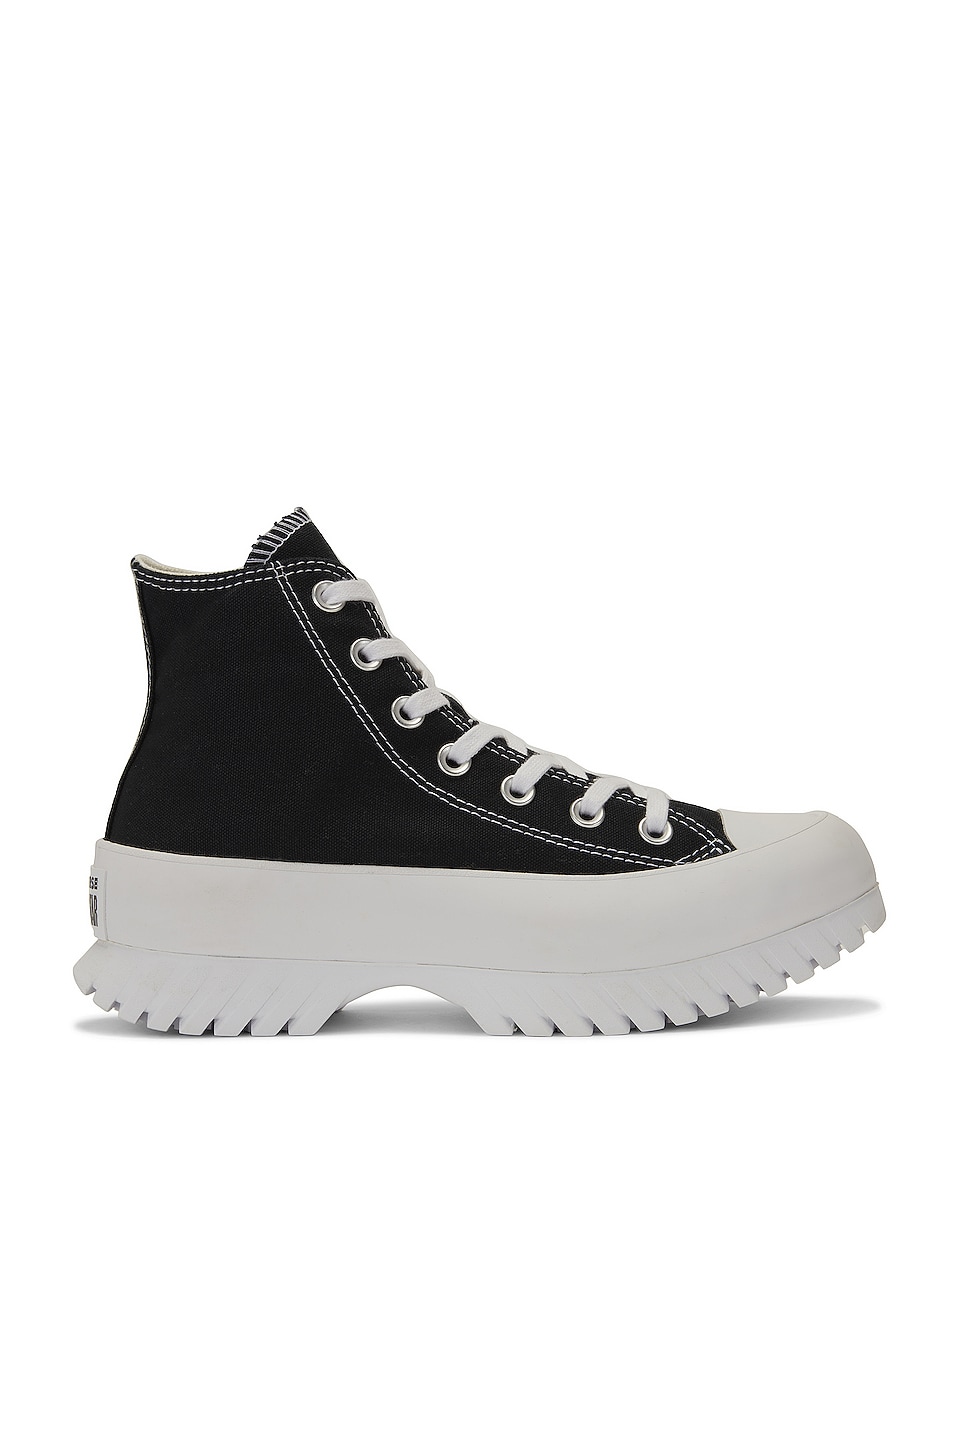 Converse Chuck Taylor All Star Lugged  Sneaker in Black, Egret, & White  | REVOLVE